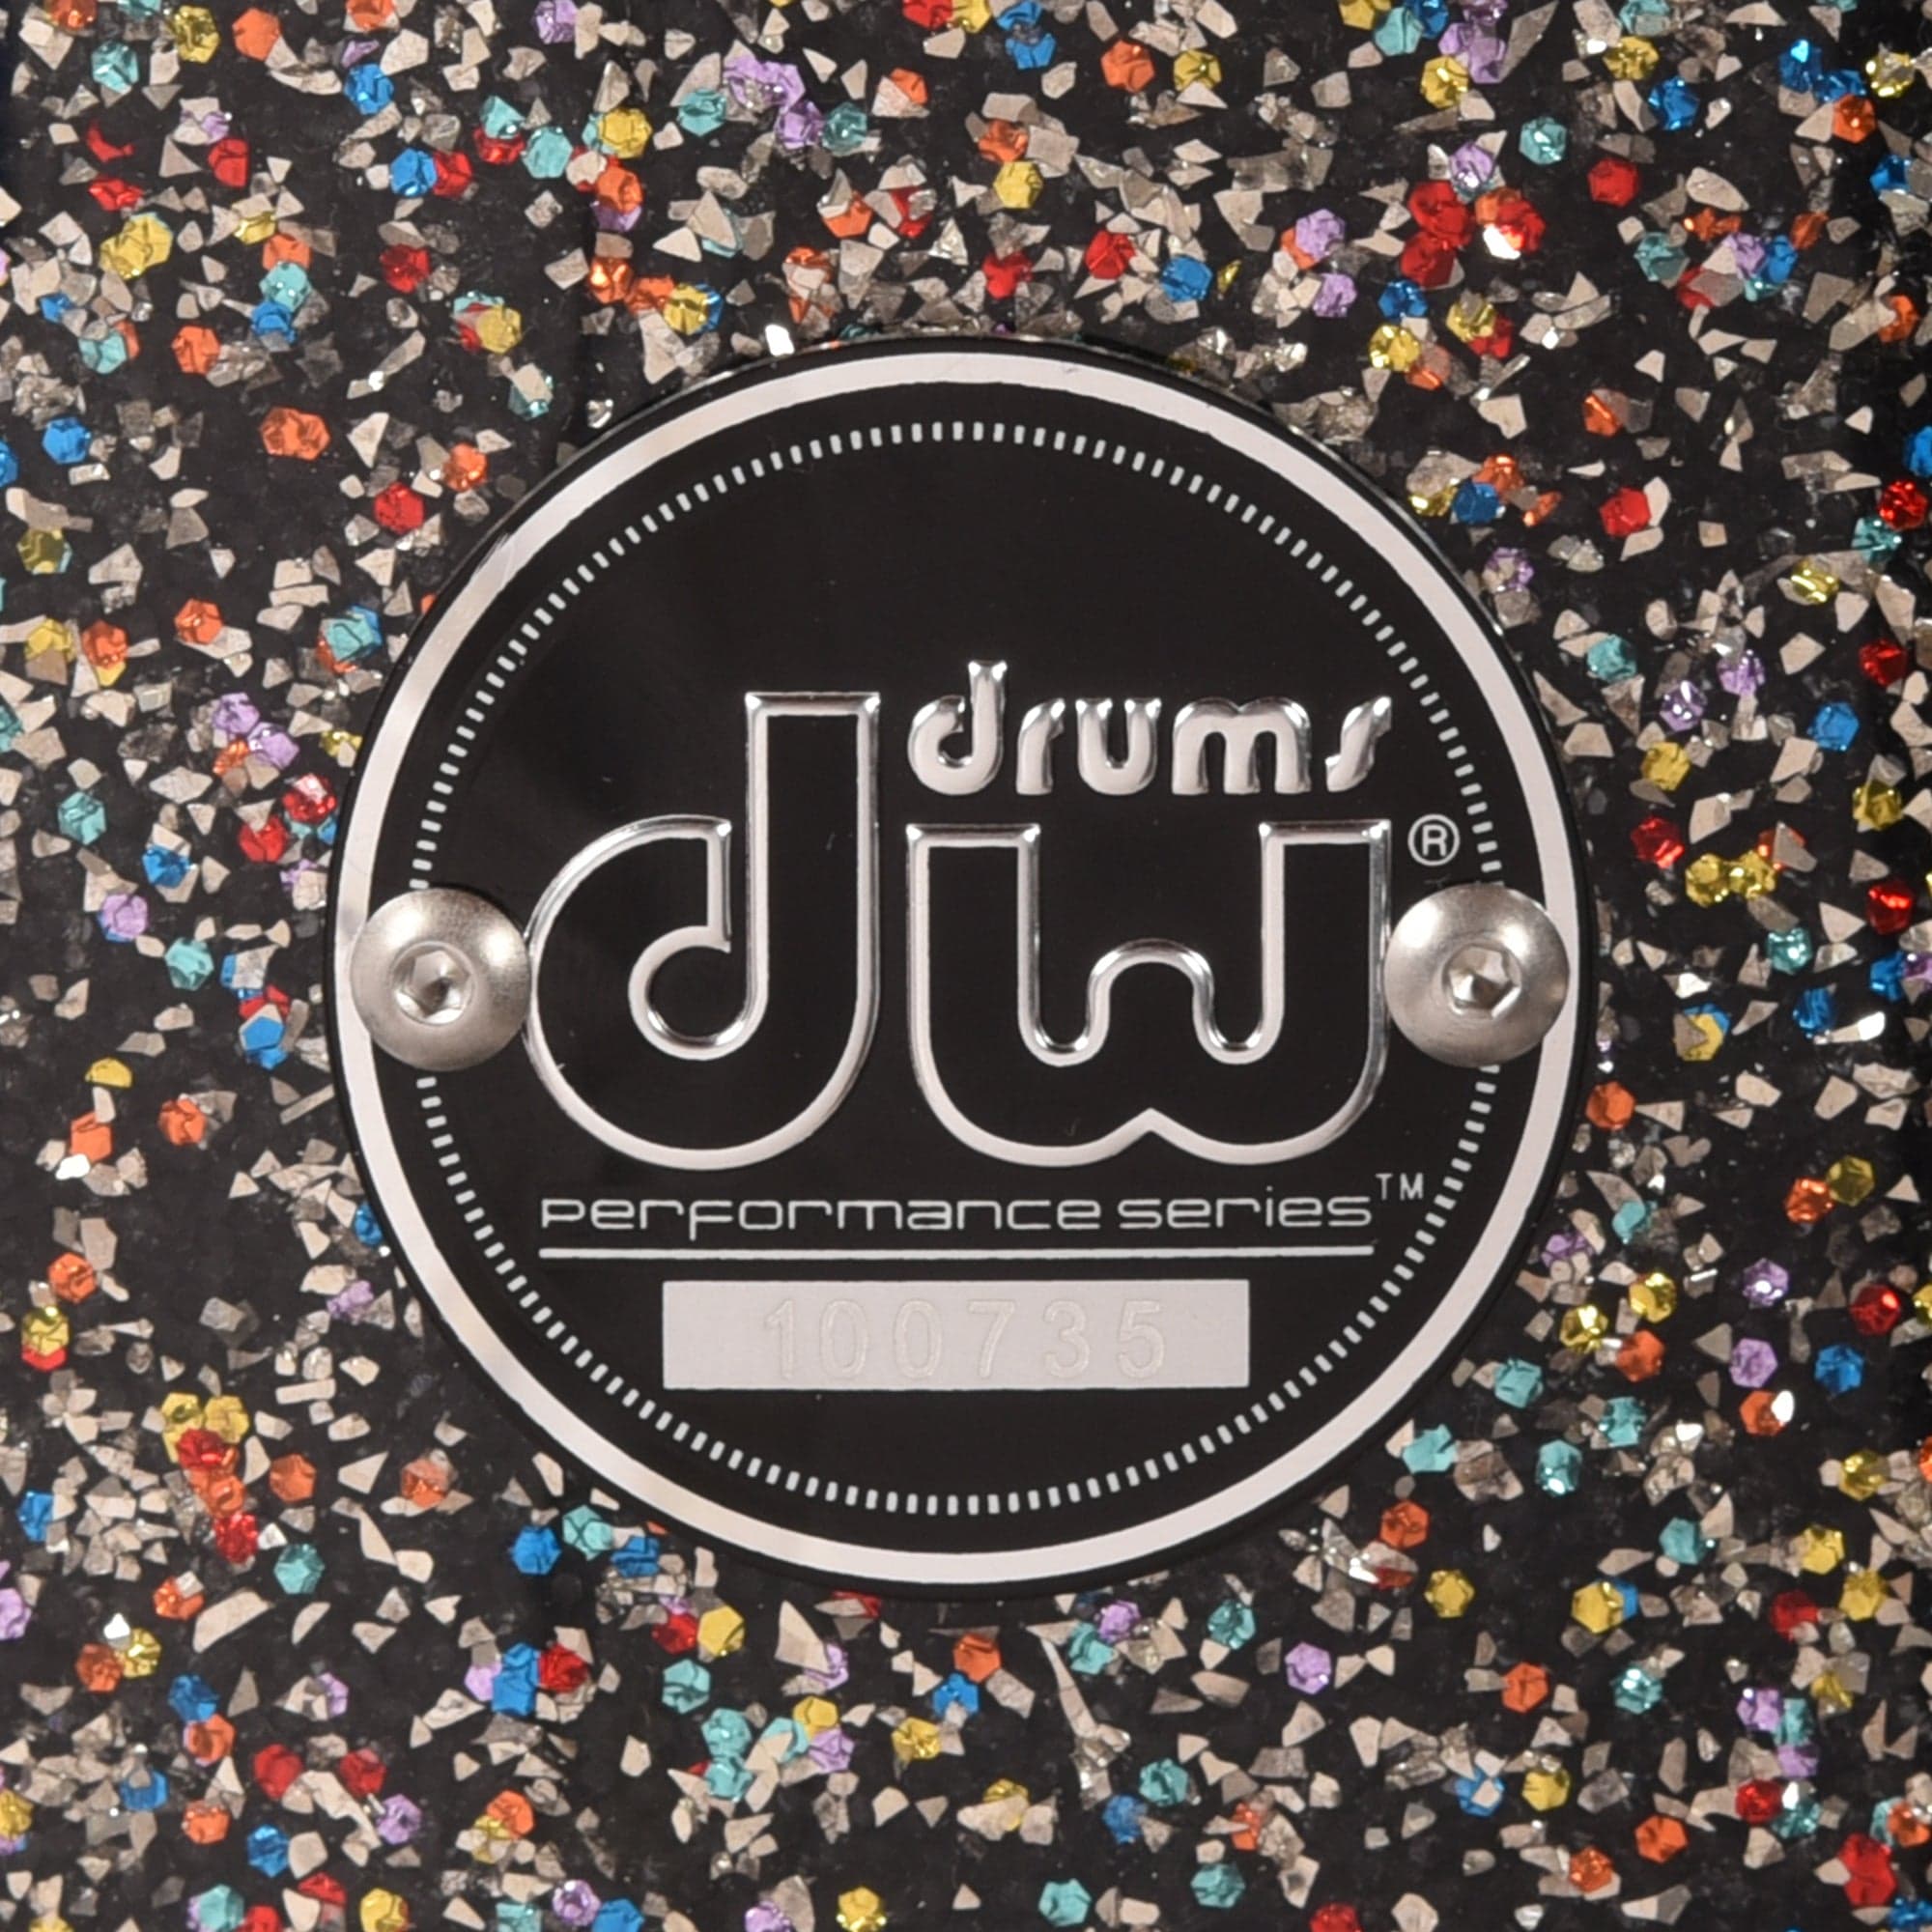 DW Performance Series 13/16/22 3pc. Drum Kit Confetti Sparkle Drums and Percussion / Acoustic Drums / Full Acoustic Kits